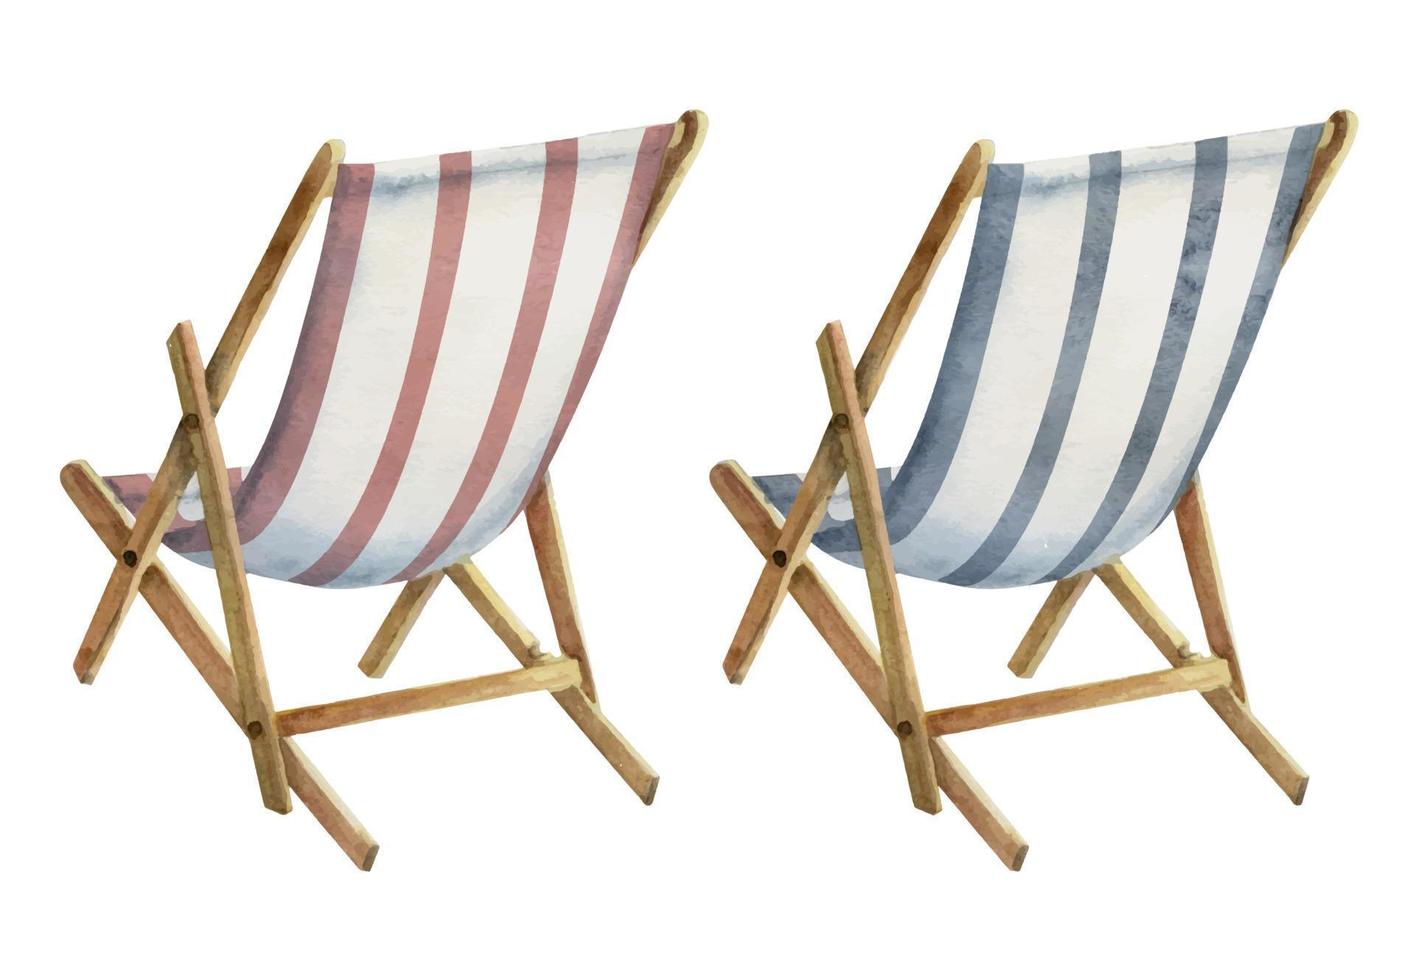 Hand drawn watercolor elements. Pair of striped beach deck chairs, sun chaise lounge. Isolated on white background. Design wall art, wedding, print, fabric, cover, card, tourism, travel booklet. vector